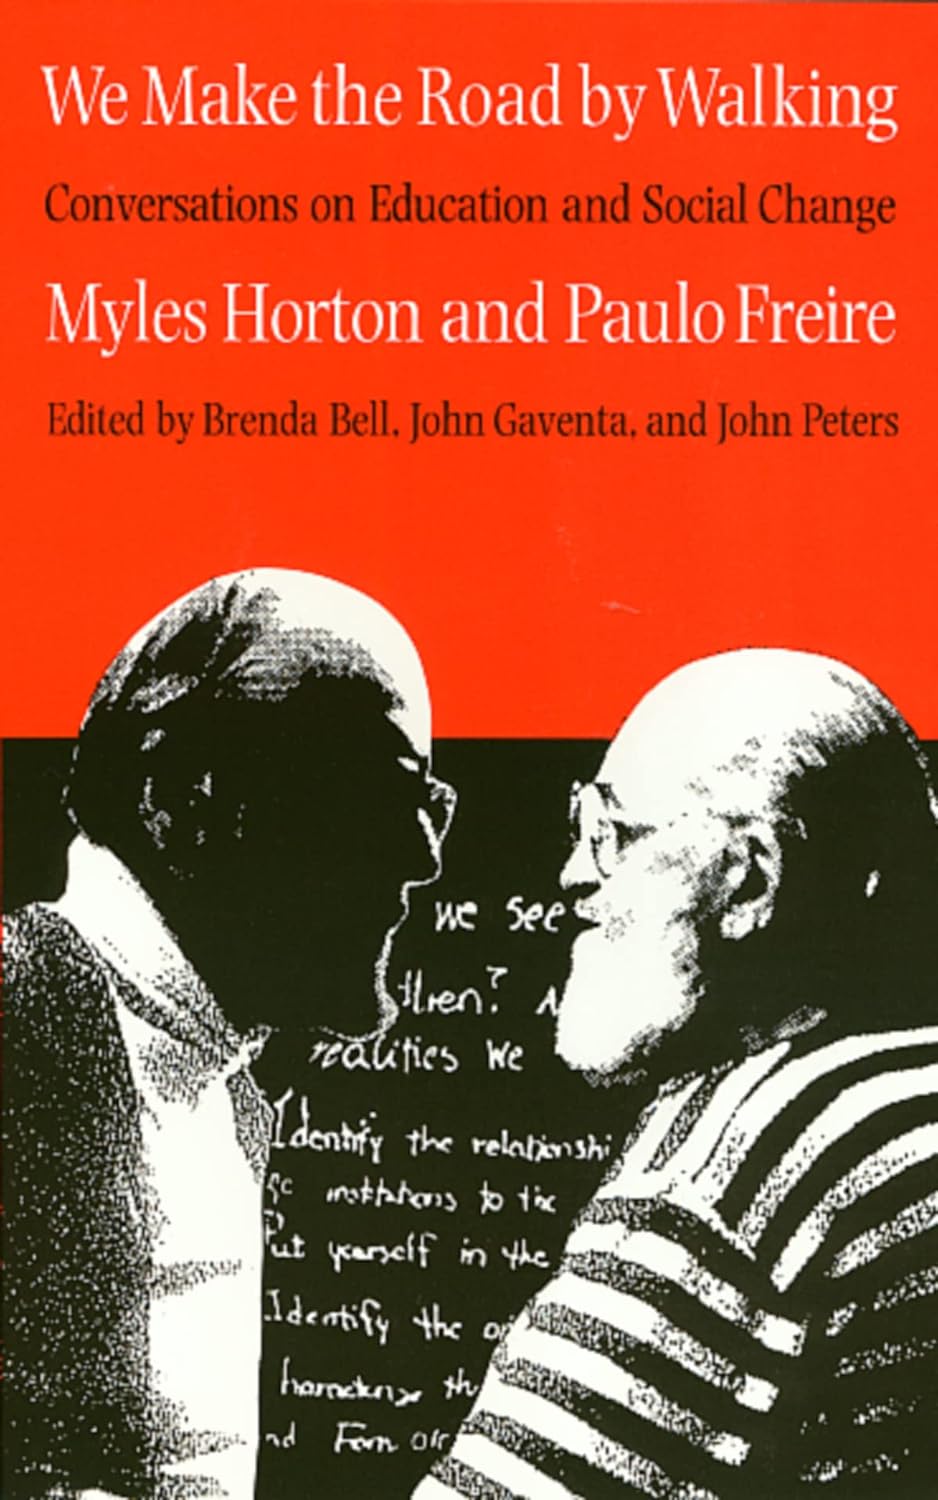 Red and black cover with black and white photograph of Myles Horton and Paulo Freire facing each other. Text at the top reads the title of the book "We Make the Road by Walking: Conversations on Education and Social Change" by Myles Horton and Paulo Freire edited by Brenda Bell, John Gaventa, and John Peters.